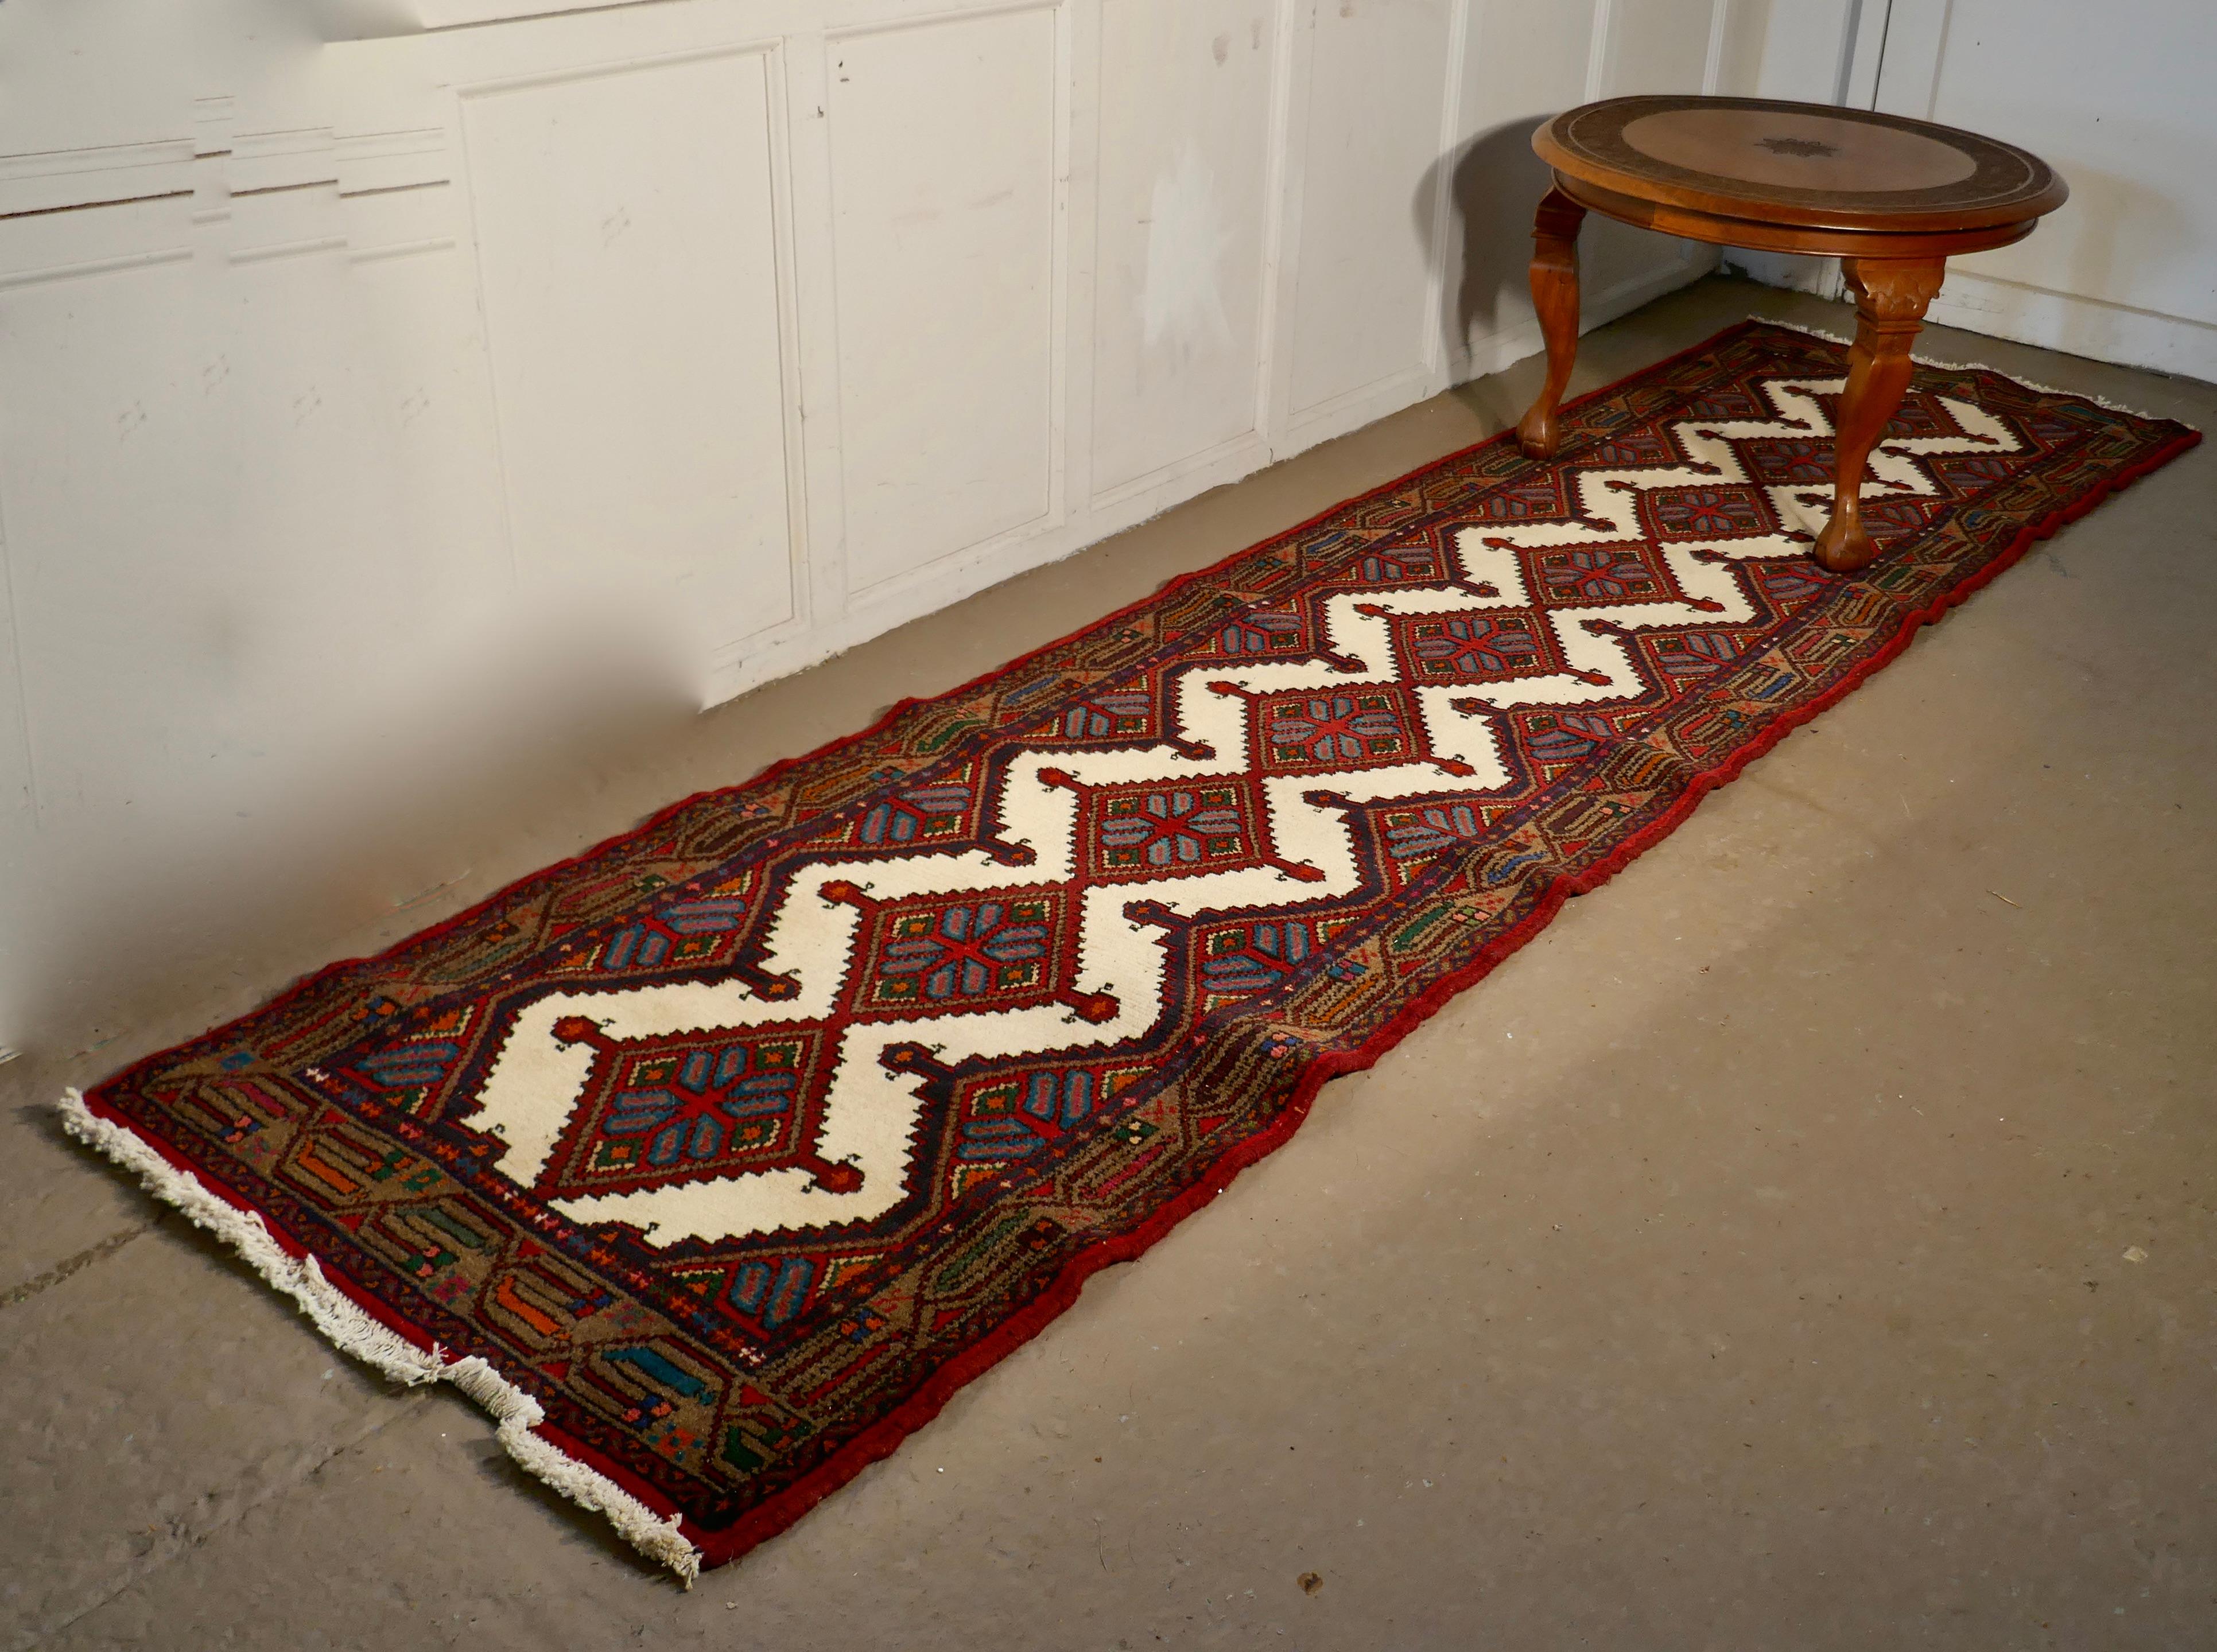 Vintage Hand Woven Persian 10ft Carpet Runner

A superb looking piece dating from around 1930 and has a lovely colour palette of deep red with ecru, blue and orange
The Wool Runner has 5 lozenges along its length with ecru fringes at both ends